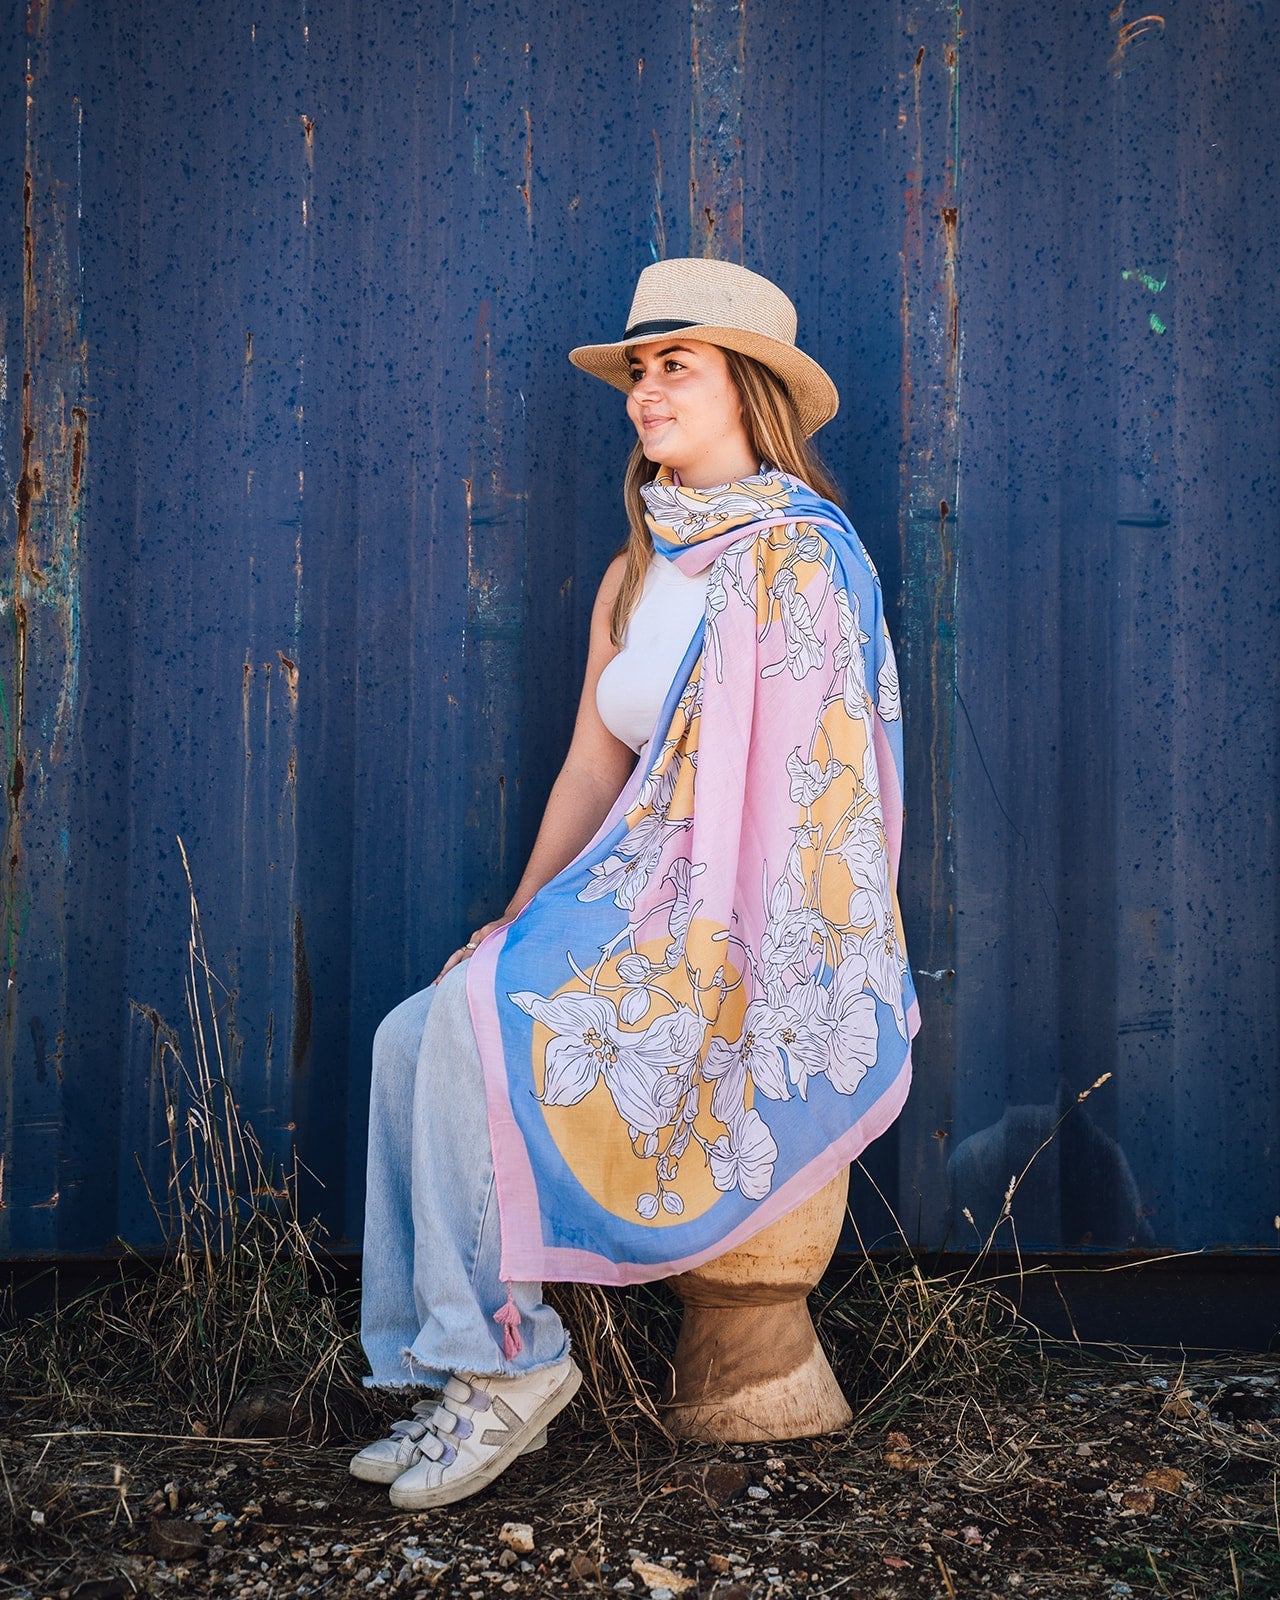 Lily Abstract Floral Women's Scarf: Vibrant abstract design in pink, blue, white, and yellow tones with a whimsical white lily print. Framed with a pretty pink border and finished with playful pink tassels on each corner. Polyester blend for a soft and co